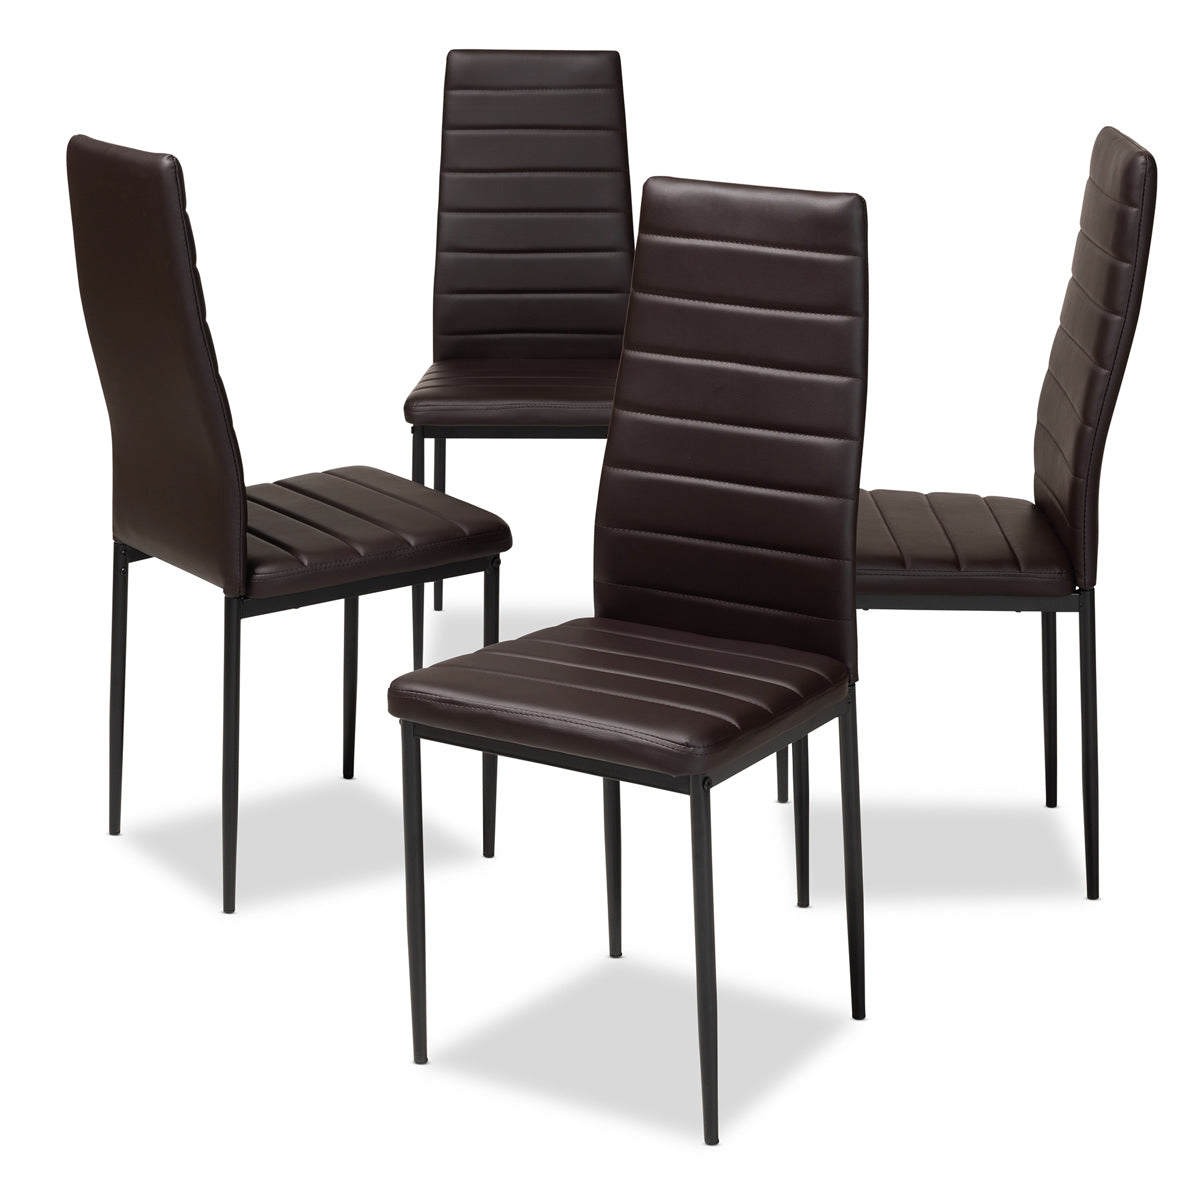 Baxton Studio Armand Modern and Contemporary Brown Faux Leather Upholstered Dining Chair (Set of 4) Baxton Studio-dining chair-Minimal And Modern - 1